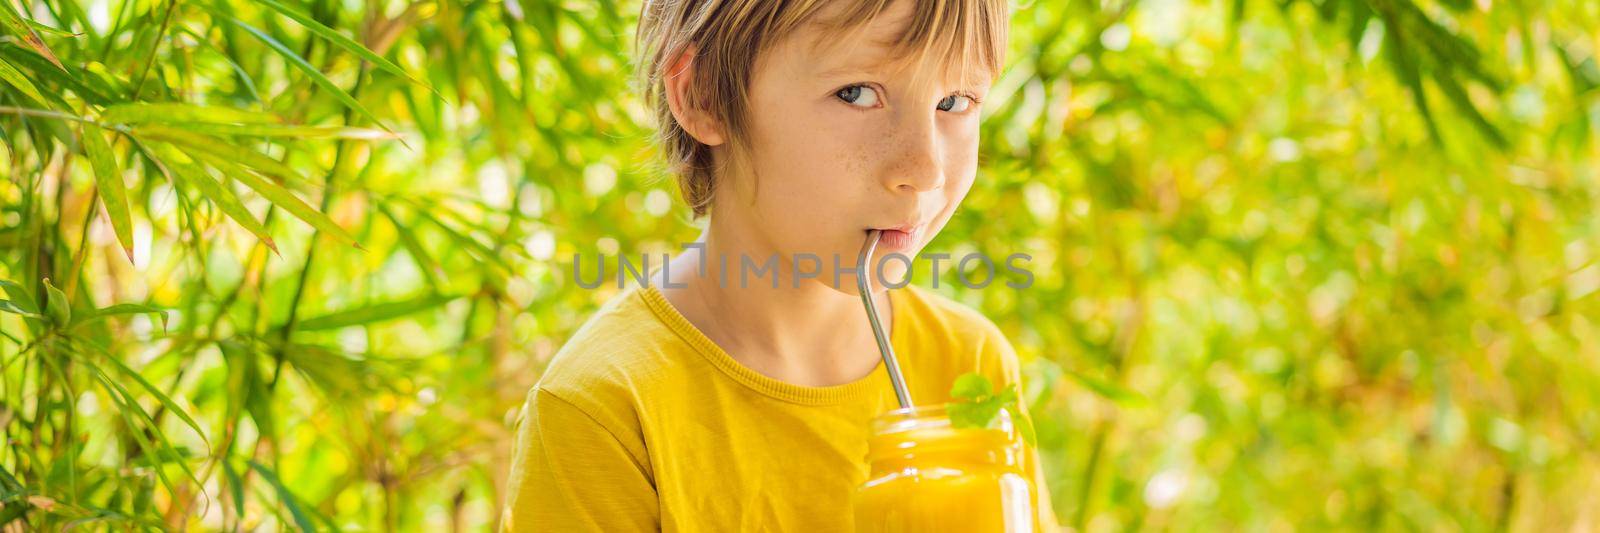 Boy drinking juicy smoothie from mango in glass mason jar. Healthy life concept, copy space BANNER, LONG FORMAT by galitskaya